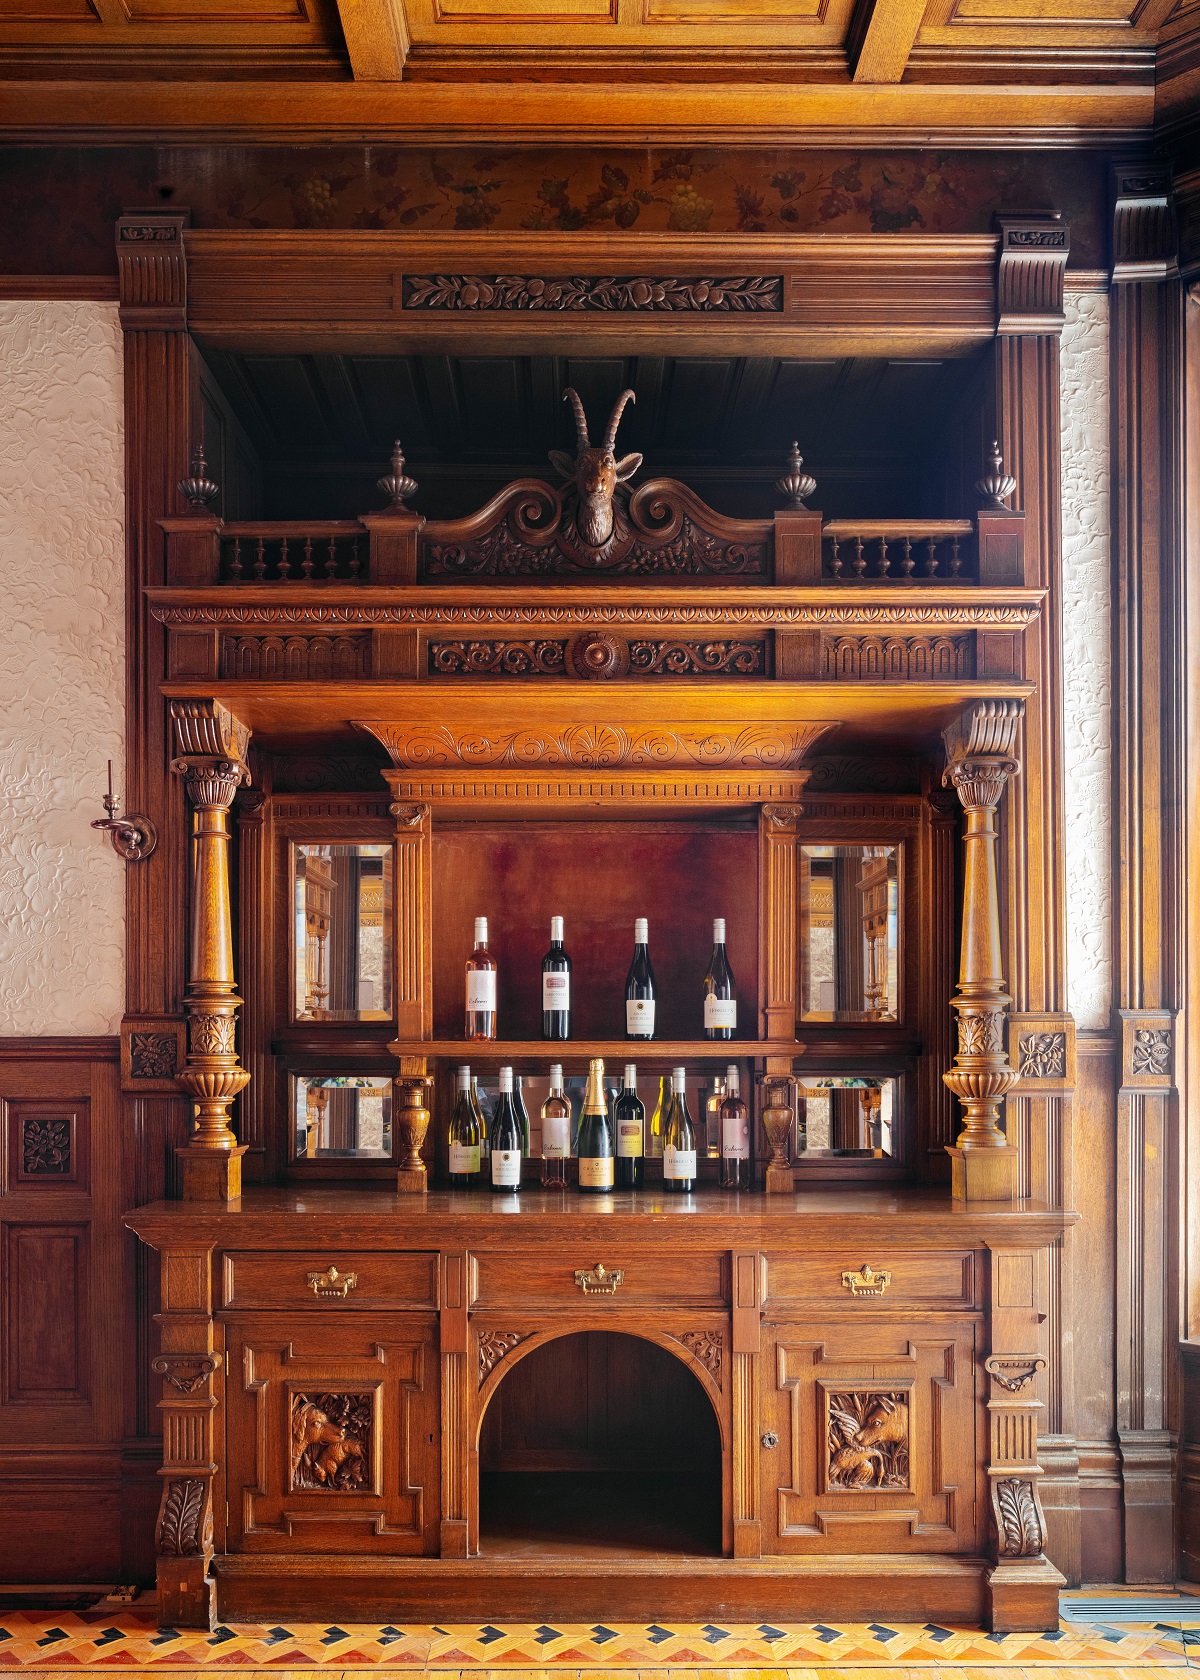 period detail of wooden bar and mantel piece for period Denver boutique hotel